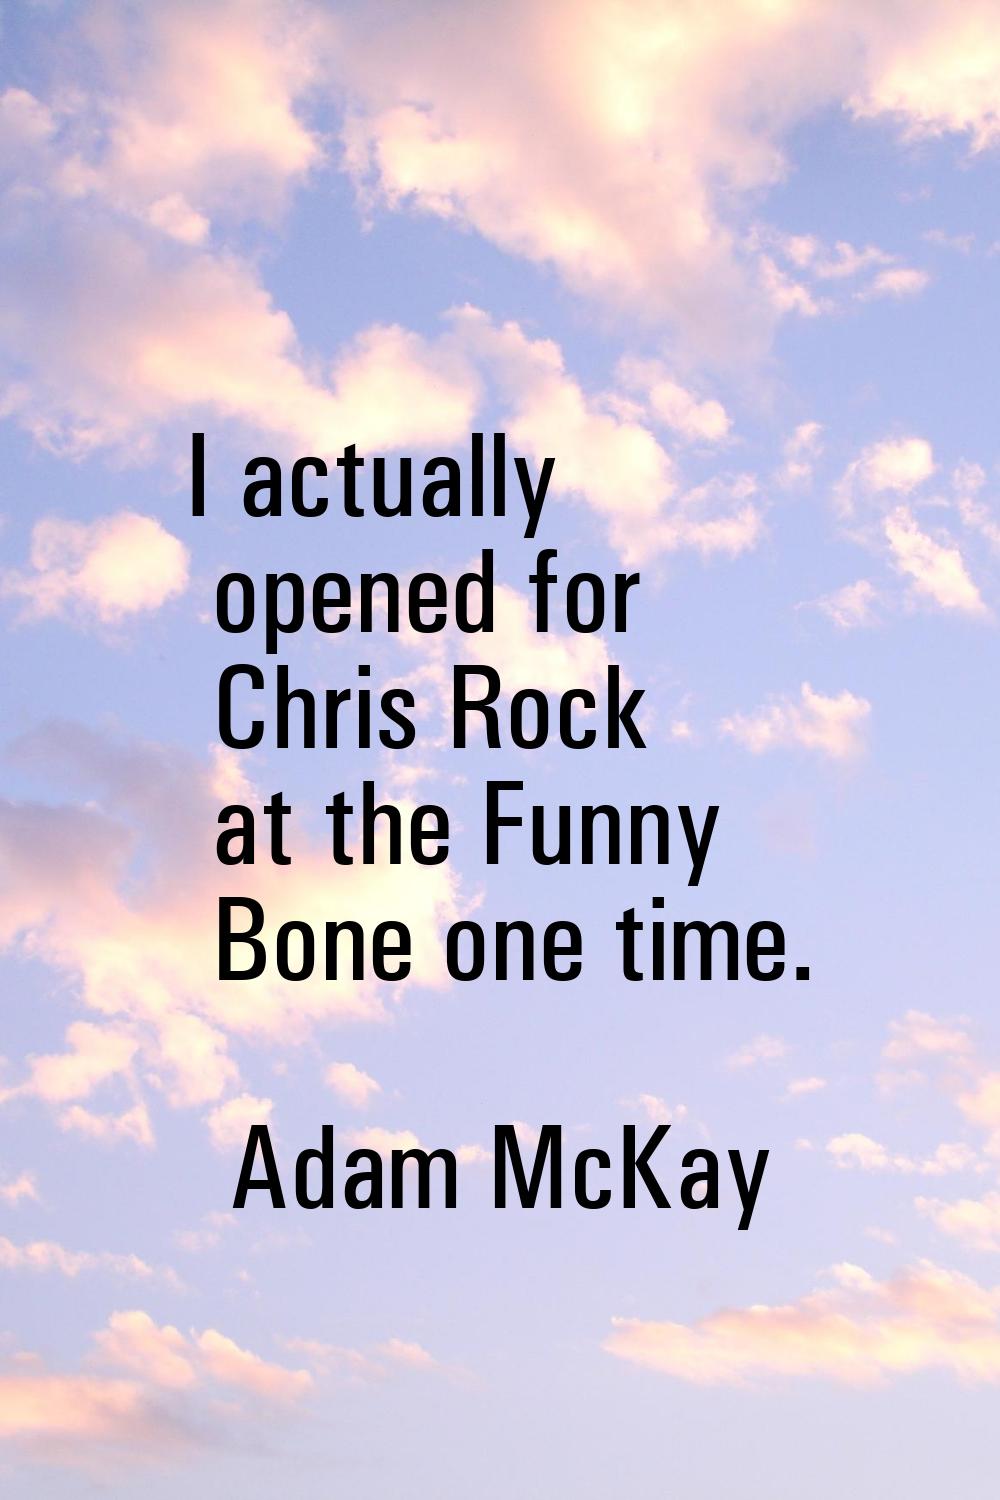 I actually opened for Chris Rock at the Funny Bone one time.